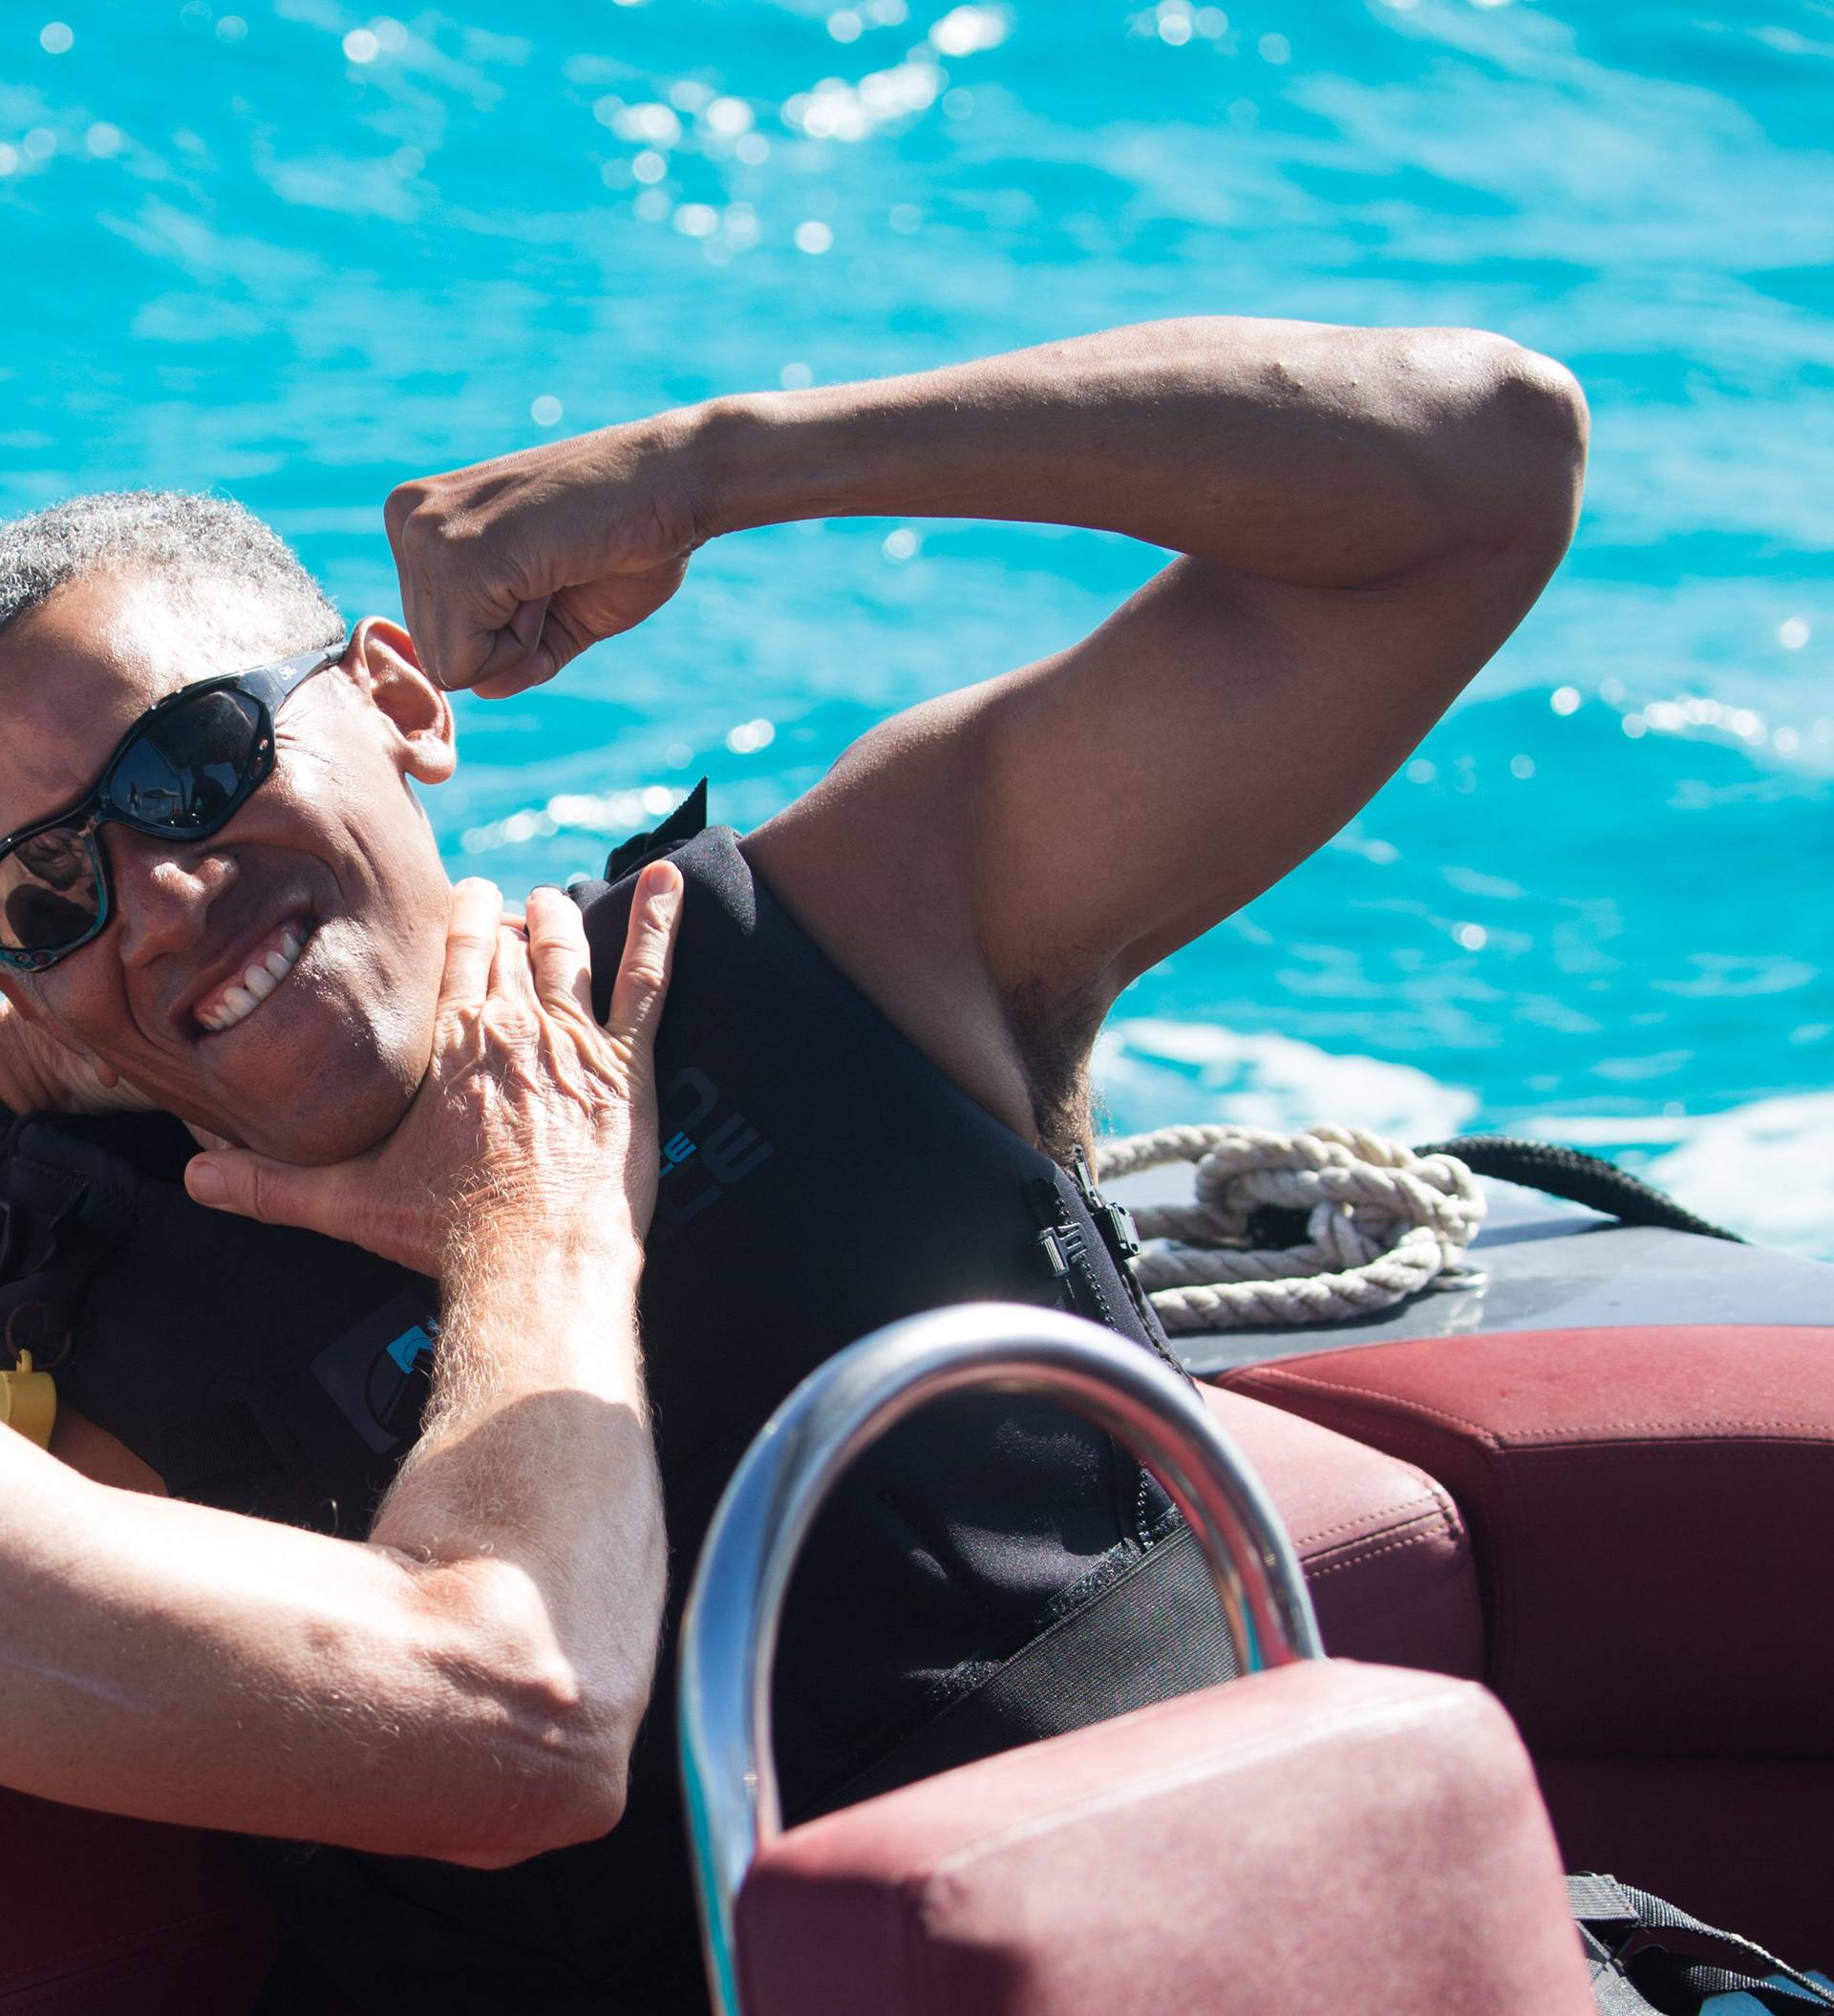 Former U.S. President Barack Obama and British businessman Richard Branson sit on a boat during Obama's holiday on Branson's Moskito island, in the British Virgin Islands, in a picture handed out by Virgin